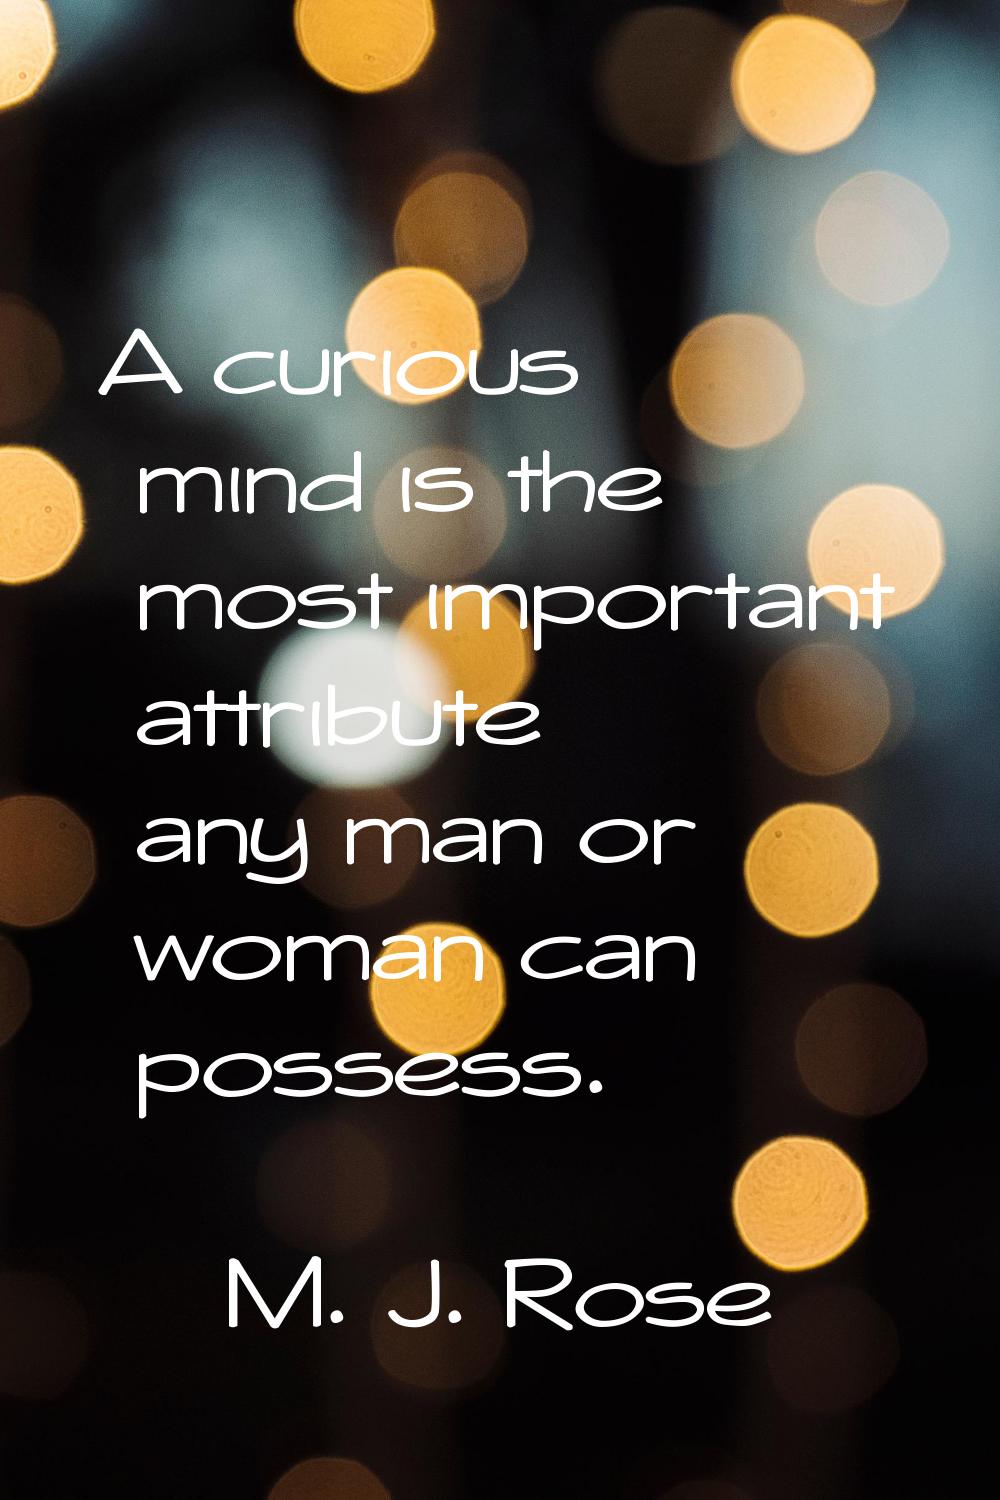 A curious mind is the most important attribute any man or woman can possess.